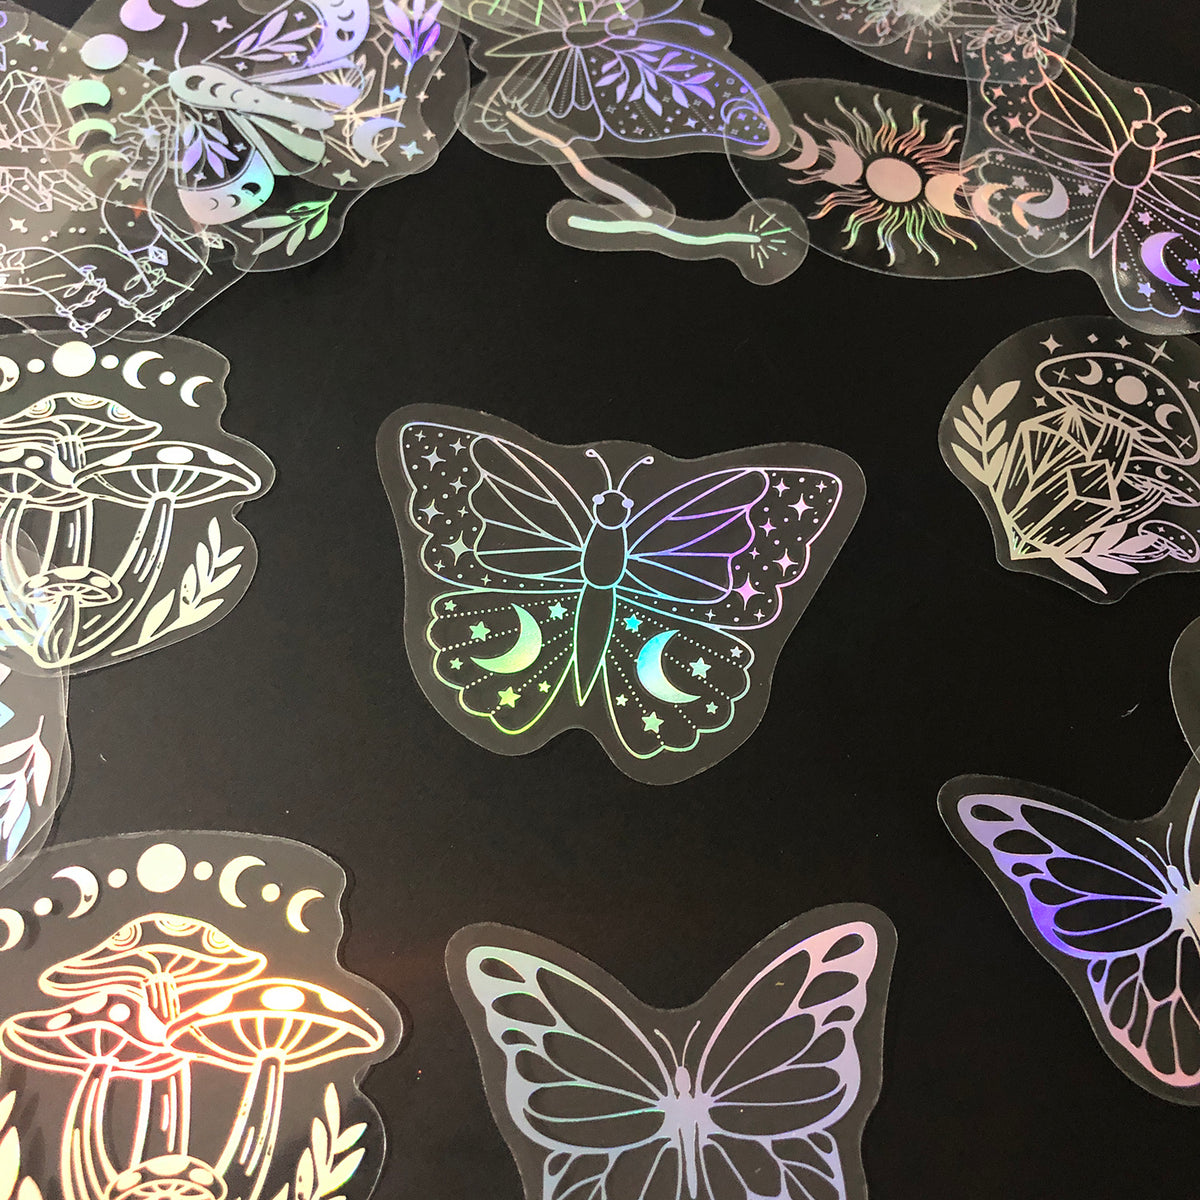 40pcs Holographic Glitter Stickers PET Transparent Shiny Waterproof Decorative Decals For Water Bottles Scrapbooking Laptop